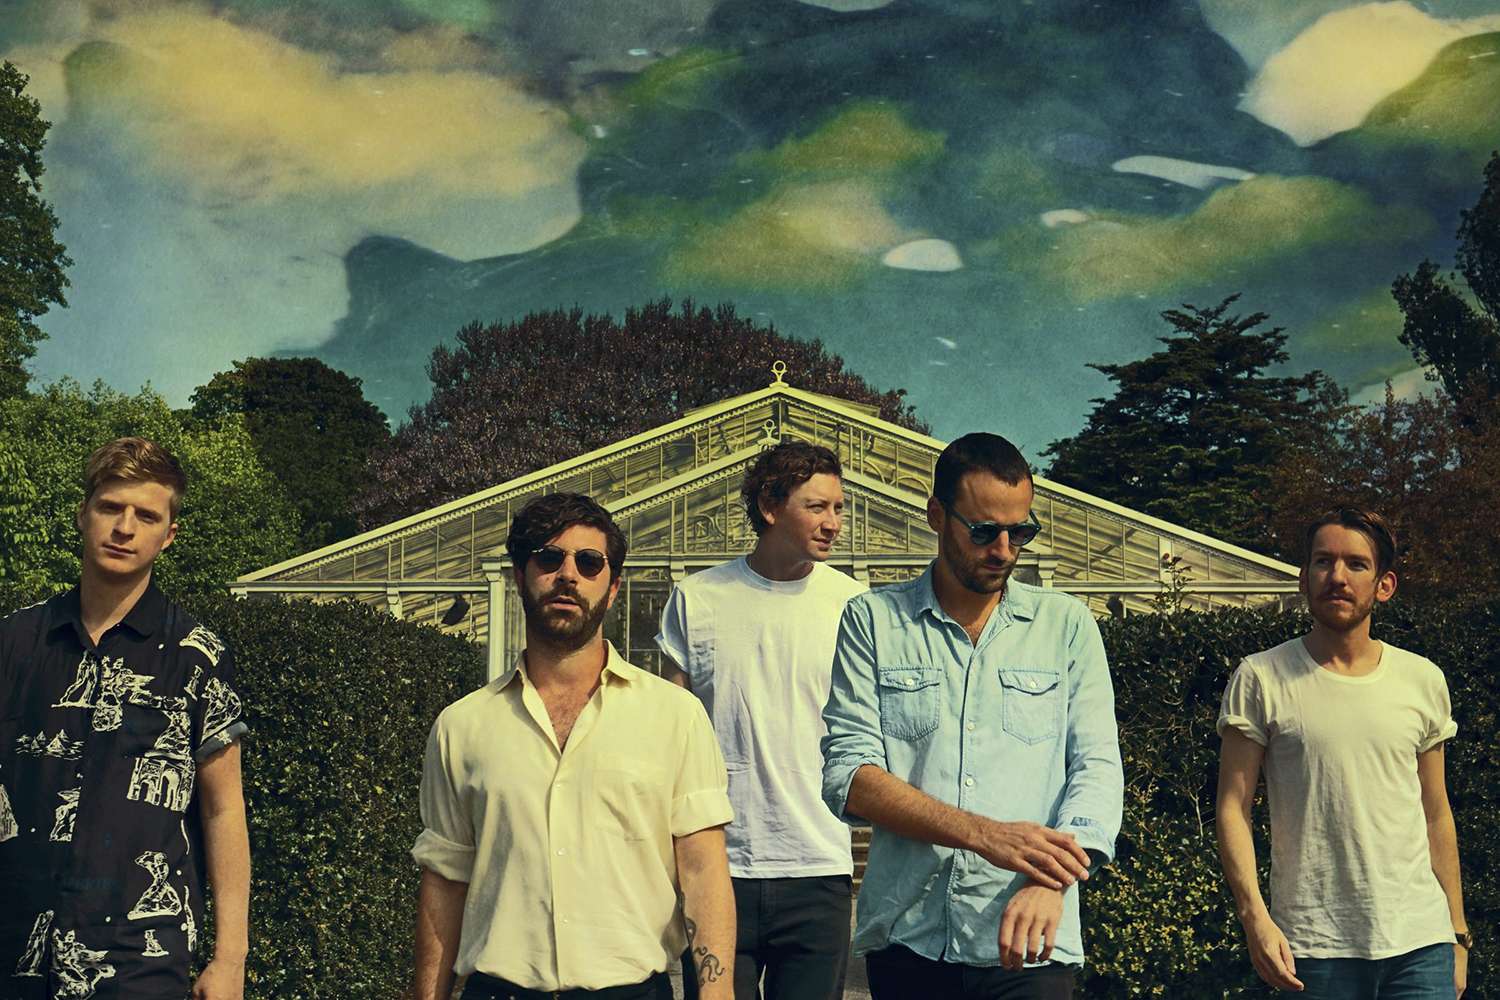 Foals will play at this year’s Clockenflap.